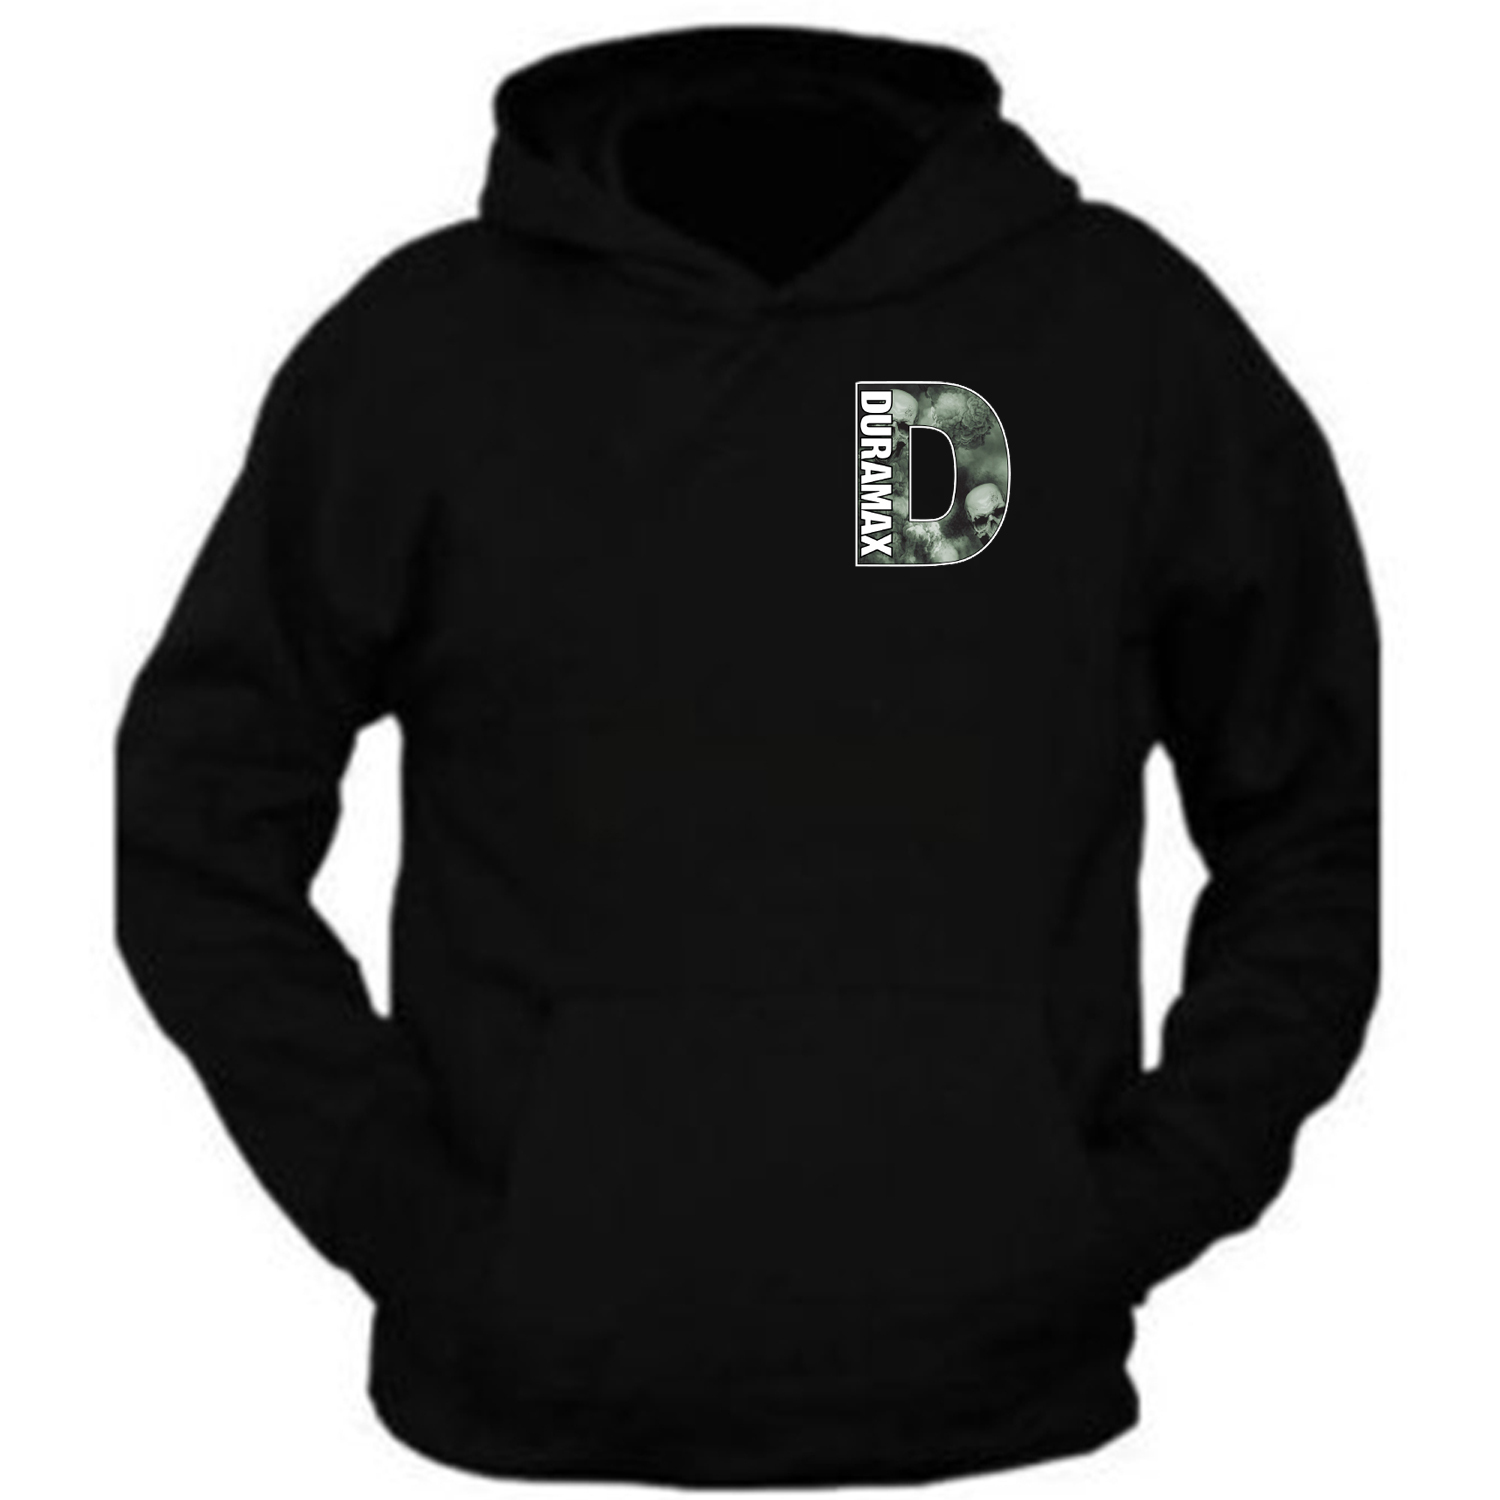 SKULL CHEVY DURAMAX HOODIE CAMO D HOODIE PULLOVER BLACK ALL SIZE S M L ...